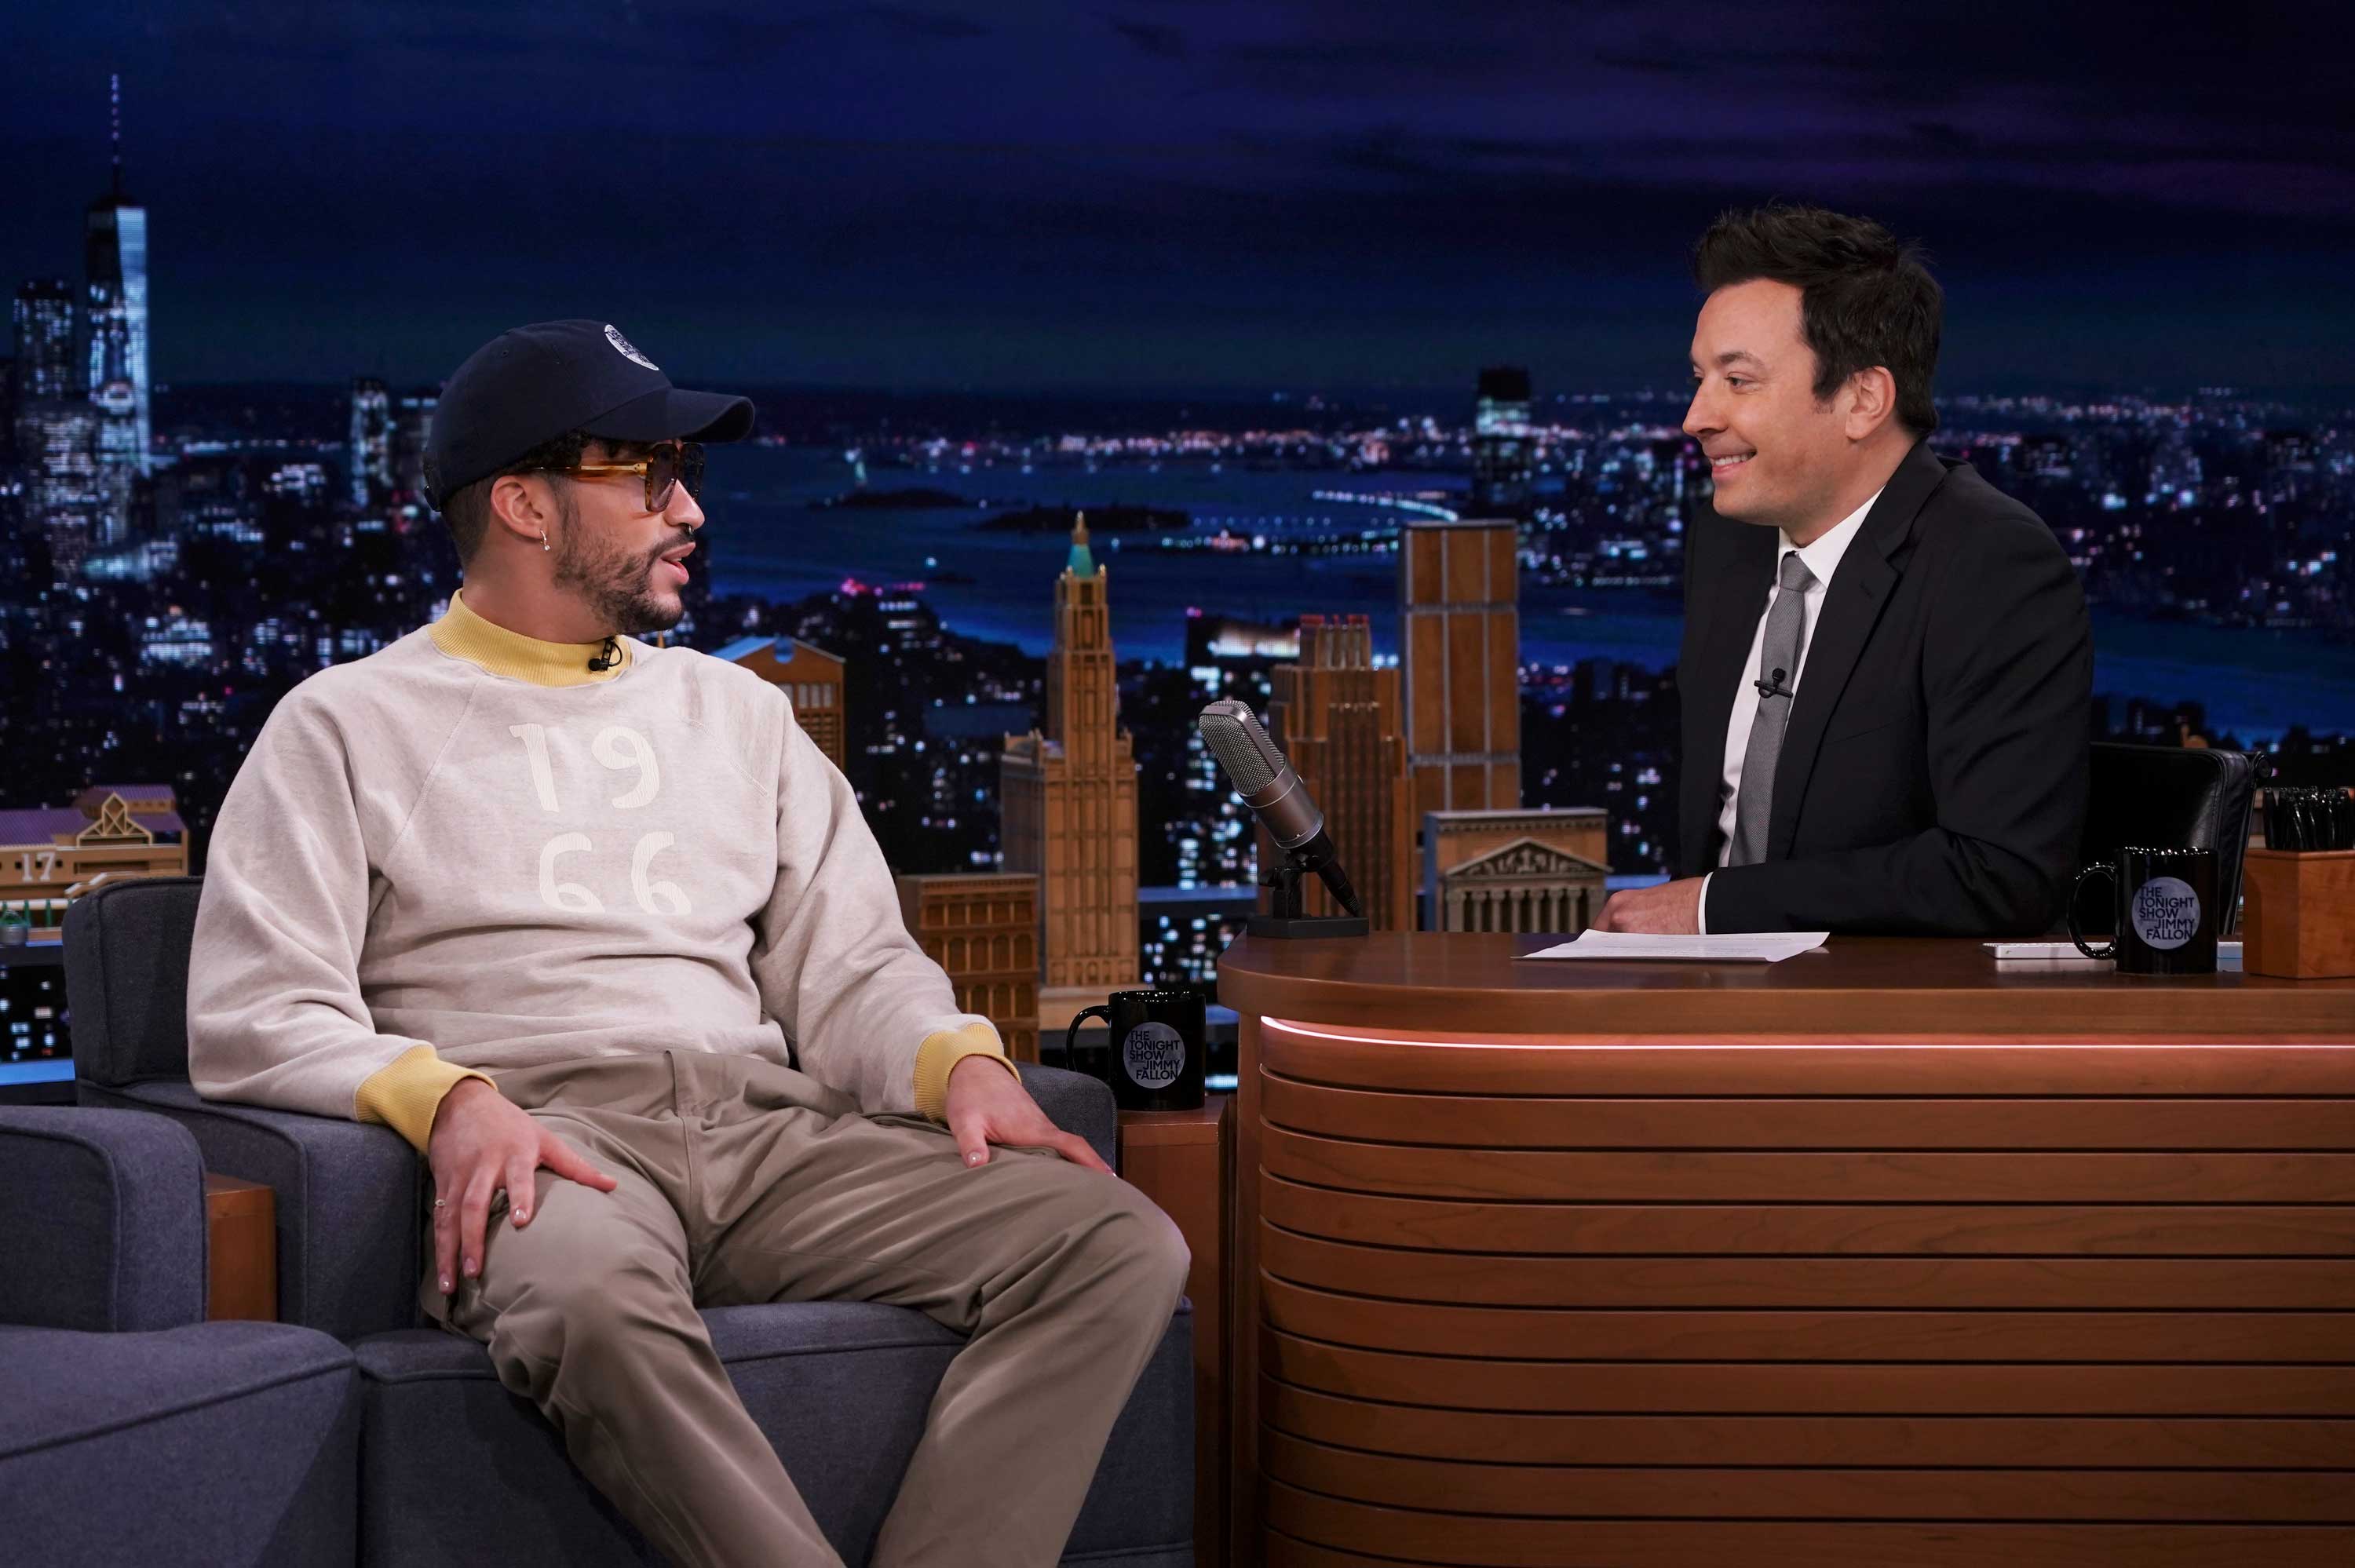 The Best of Bad Bunny and Jimmy Fallon on The Tonight Show | NBC Insider